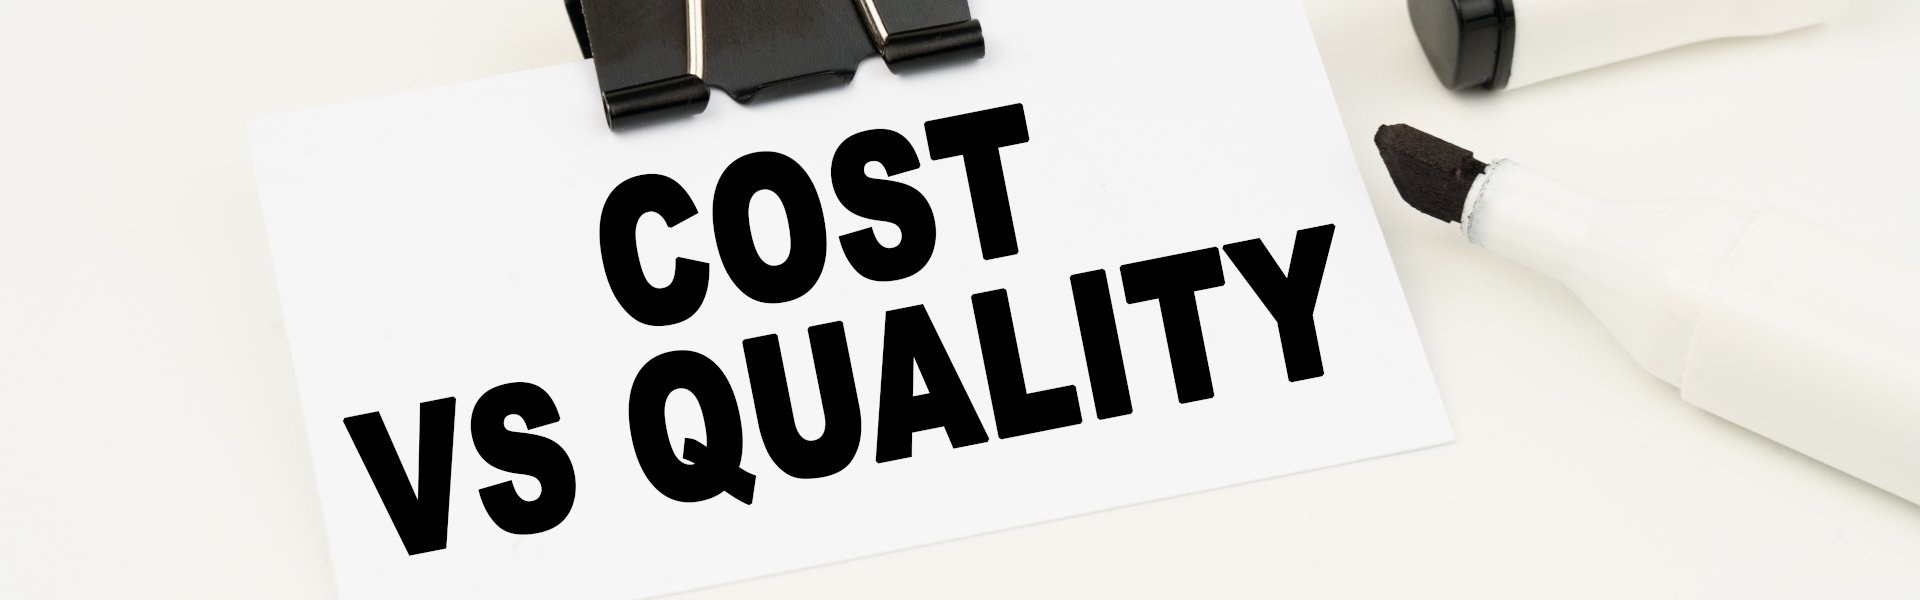 Development cost vs quality: finding the balance